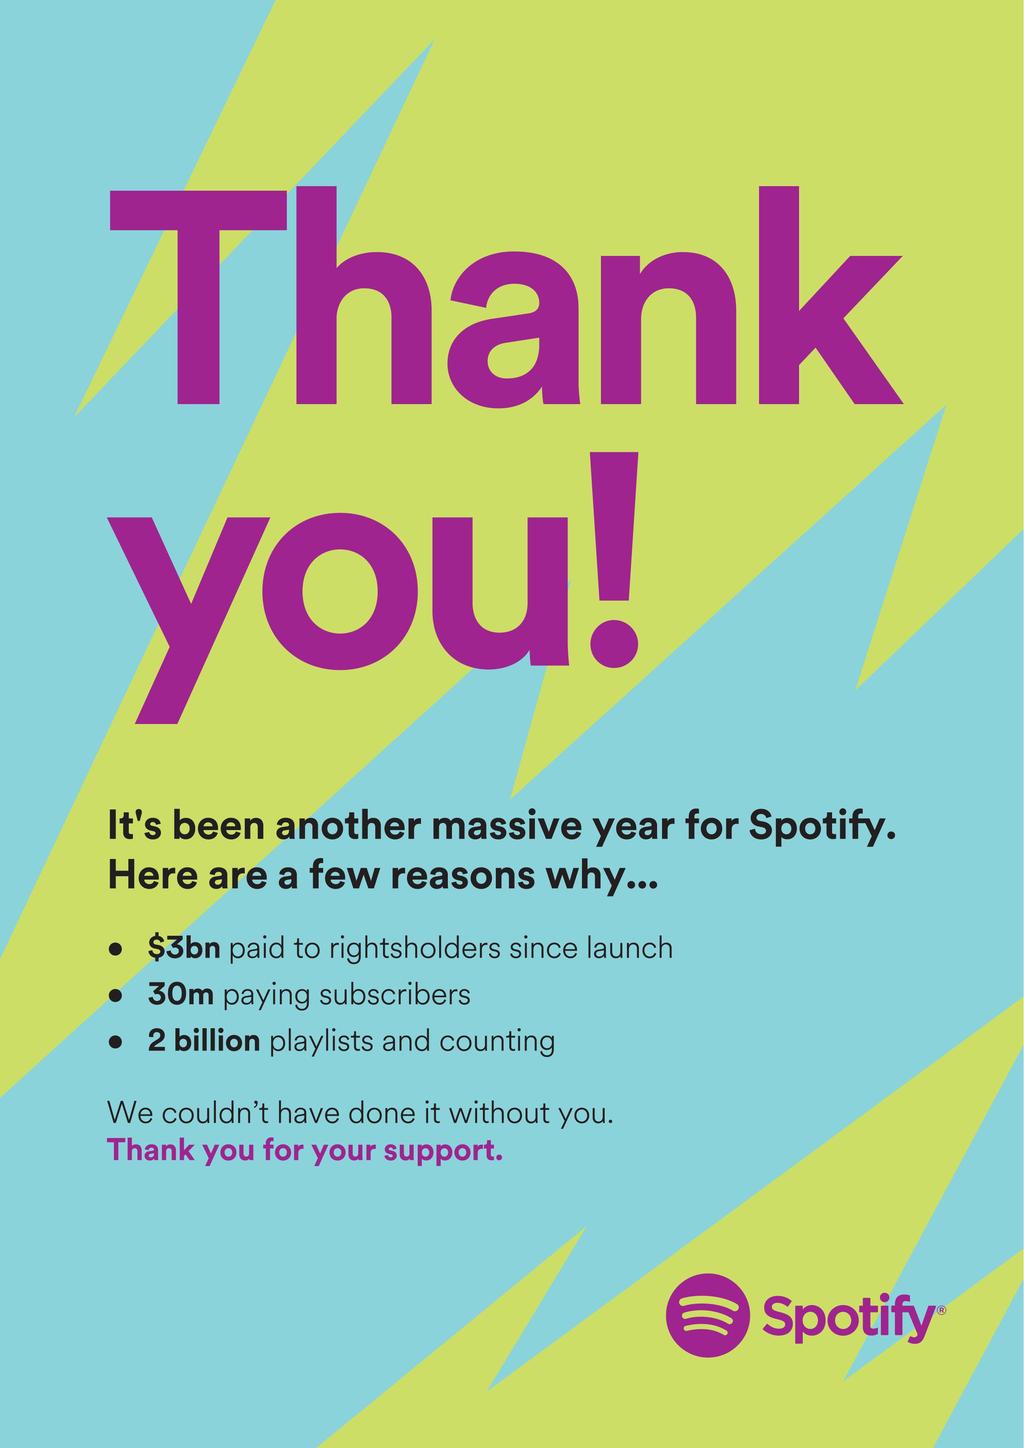 It's been another massive year for Spotify. Here are a few reasons why.... $3bn paid to rightsholders since launch.